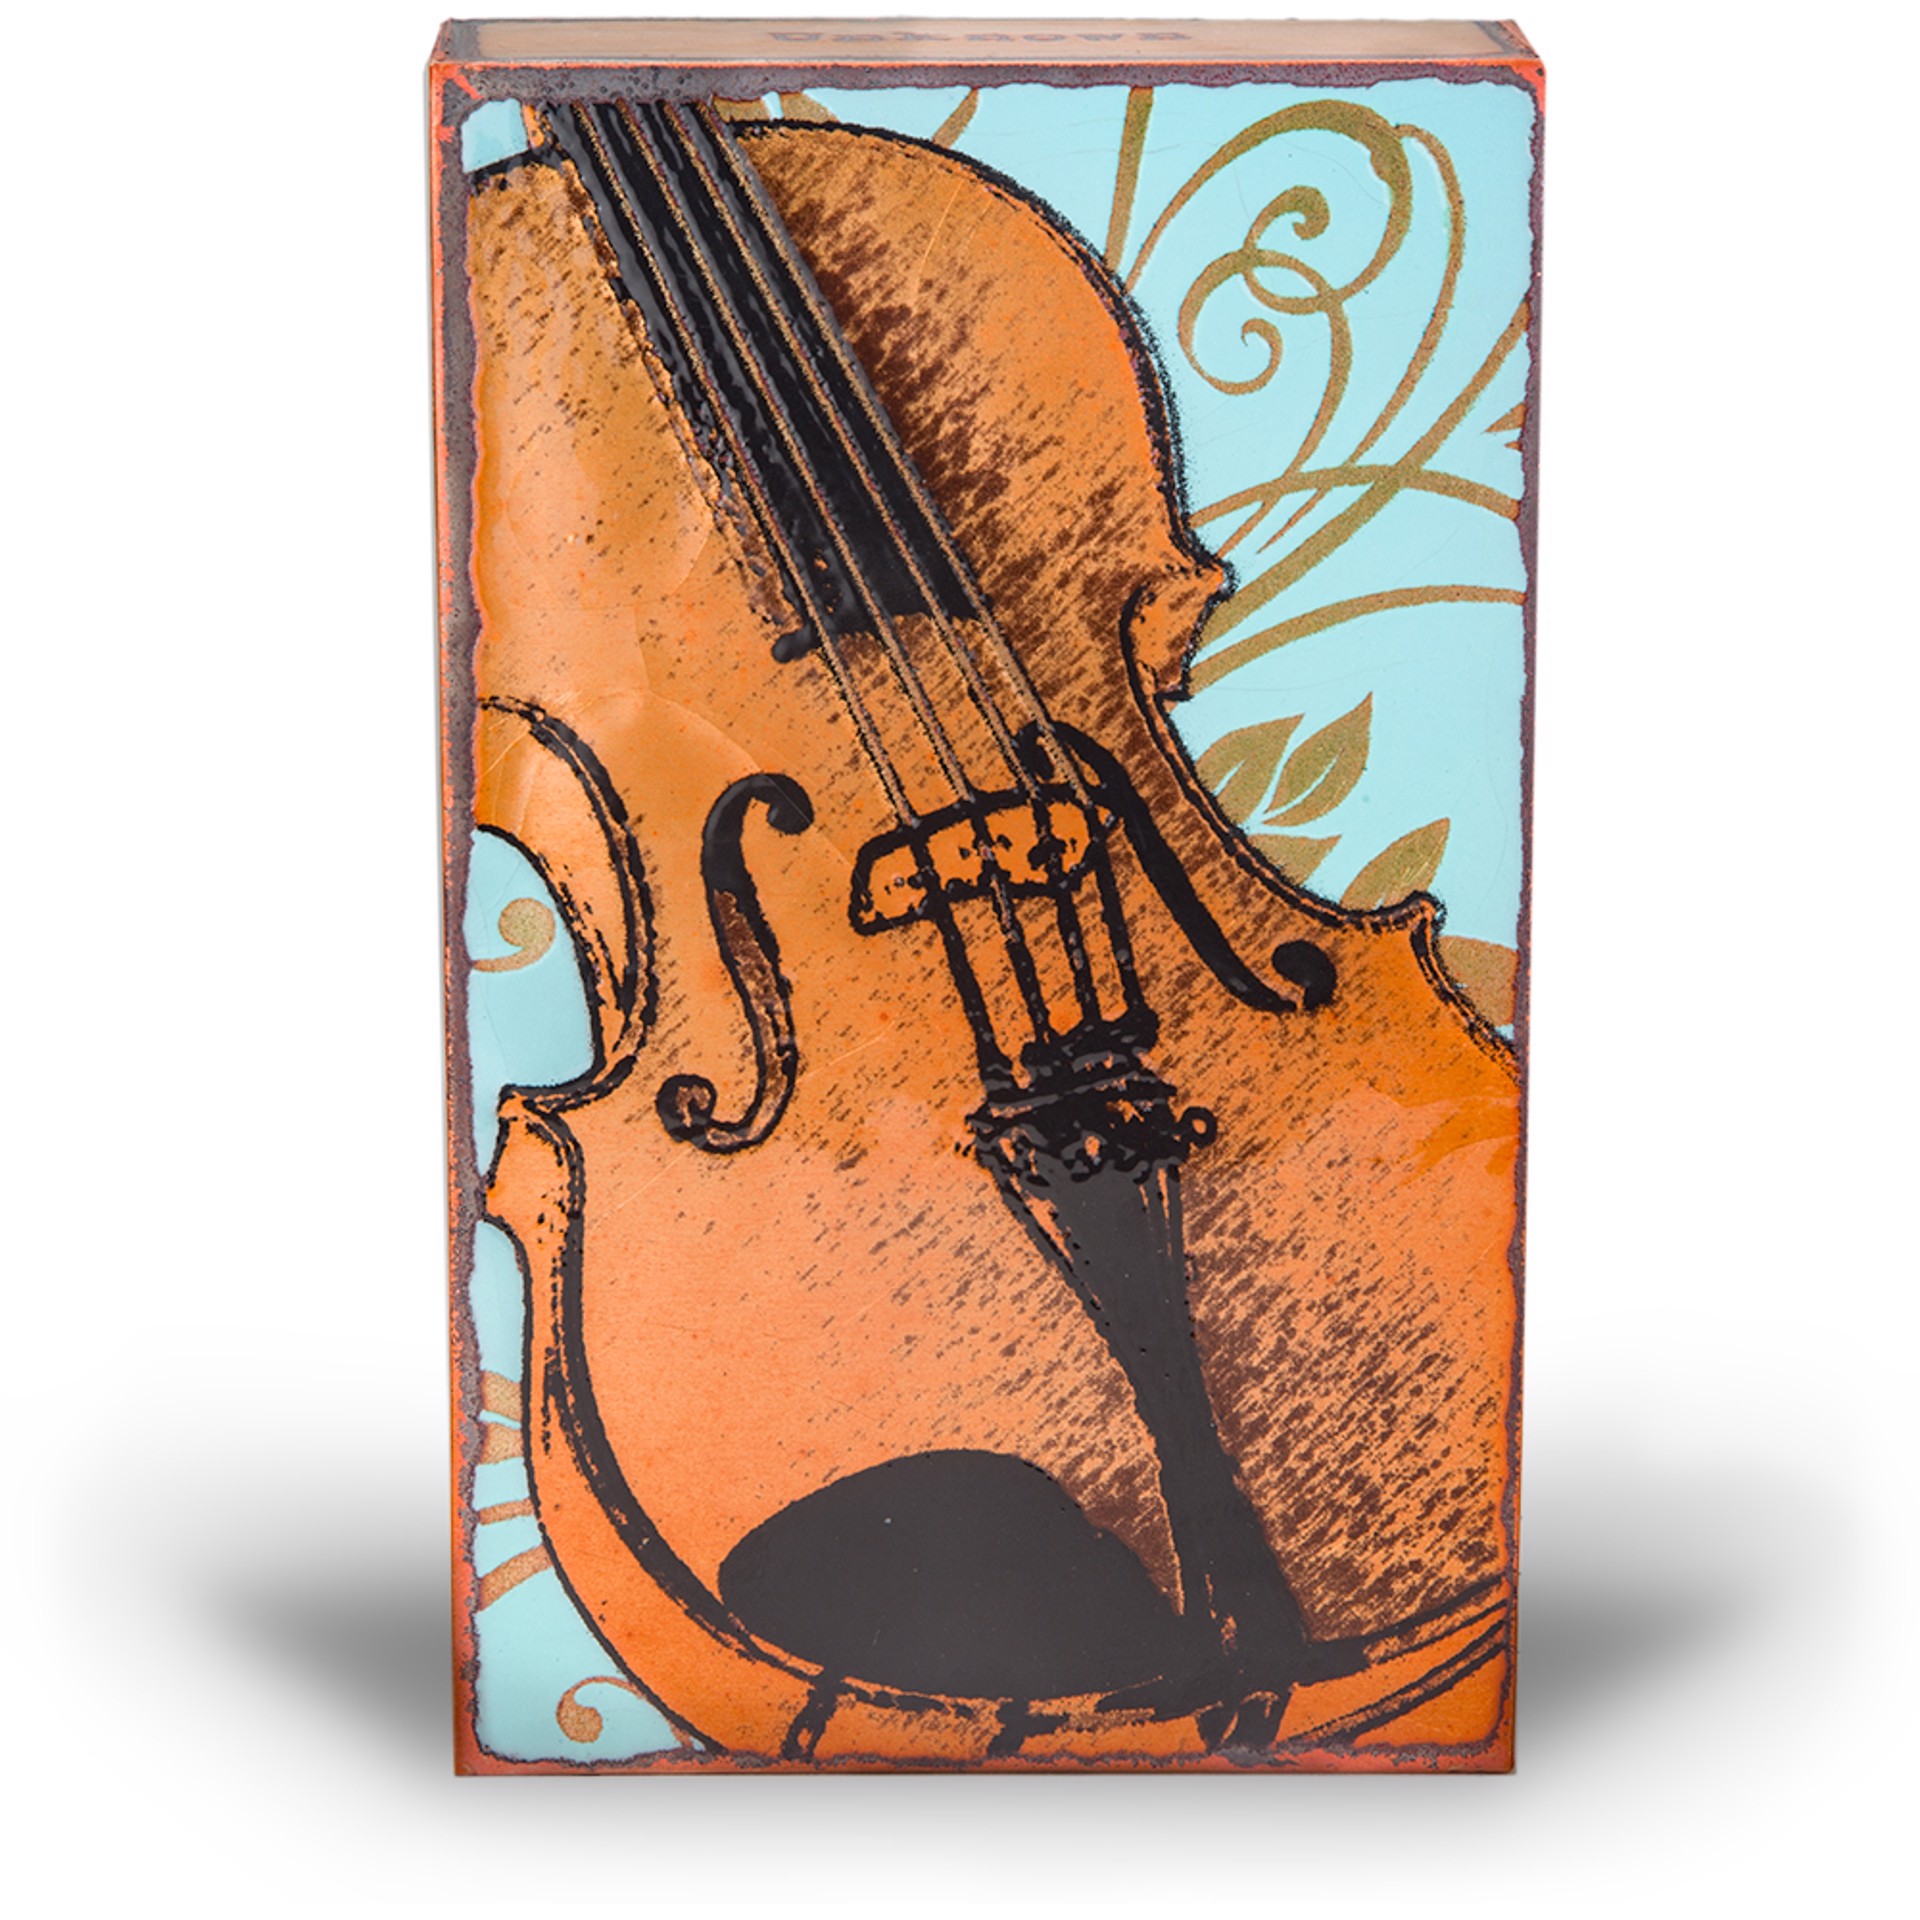 Euphony (Retired Tile) "Art is how you enrich your space. Music is how you enrich your time." - Unknown by Houston Llew